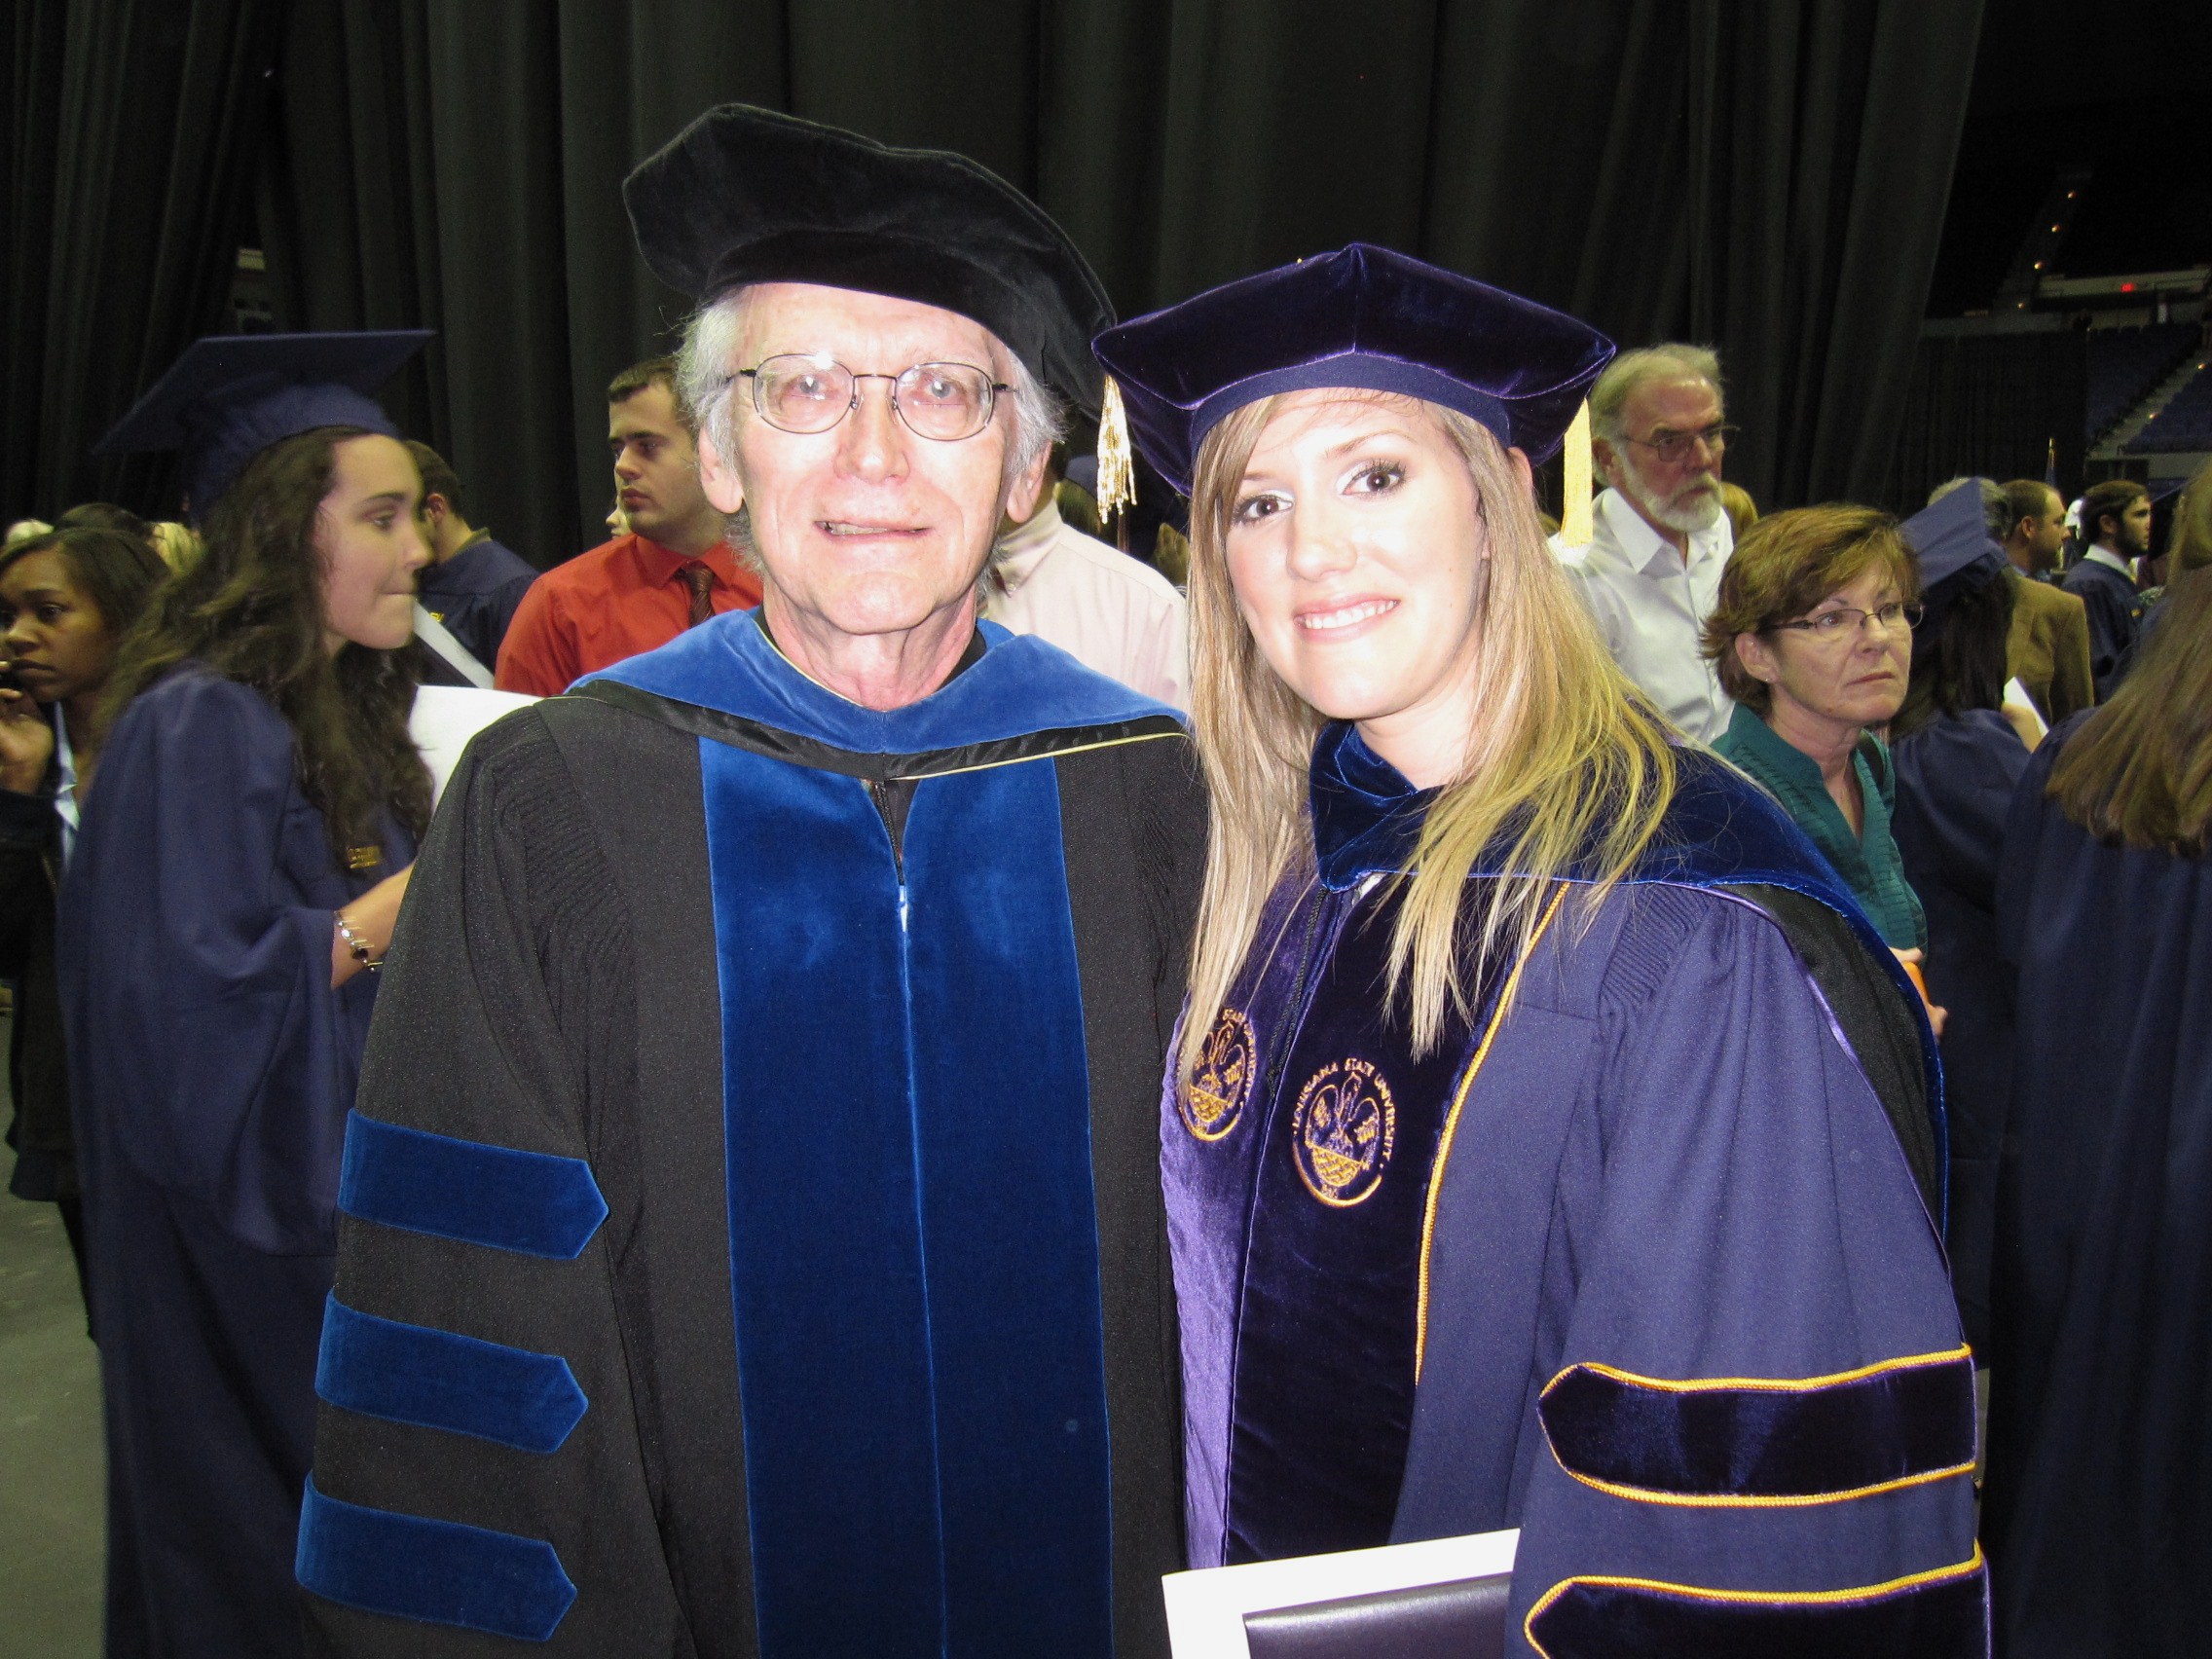 Gaines earns doctorate in political science